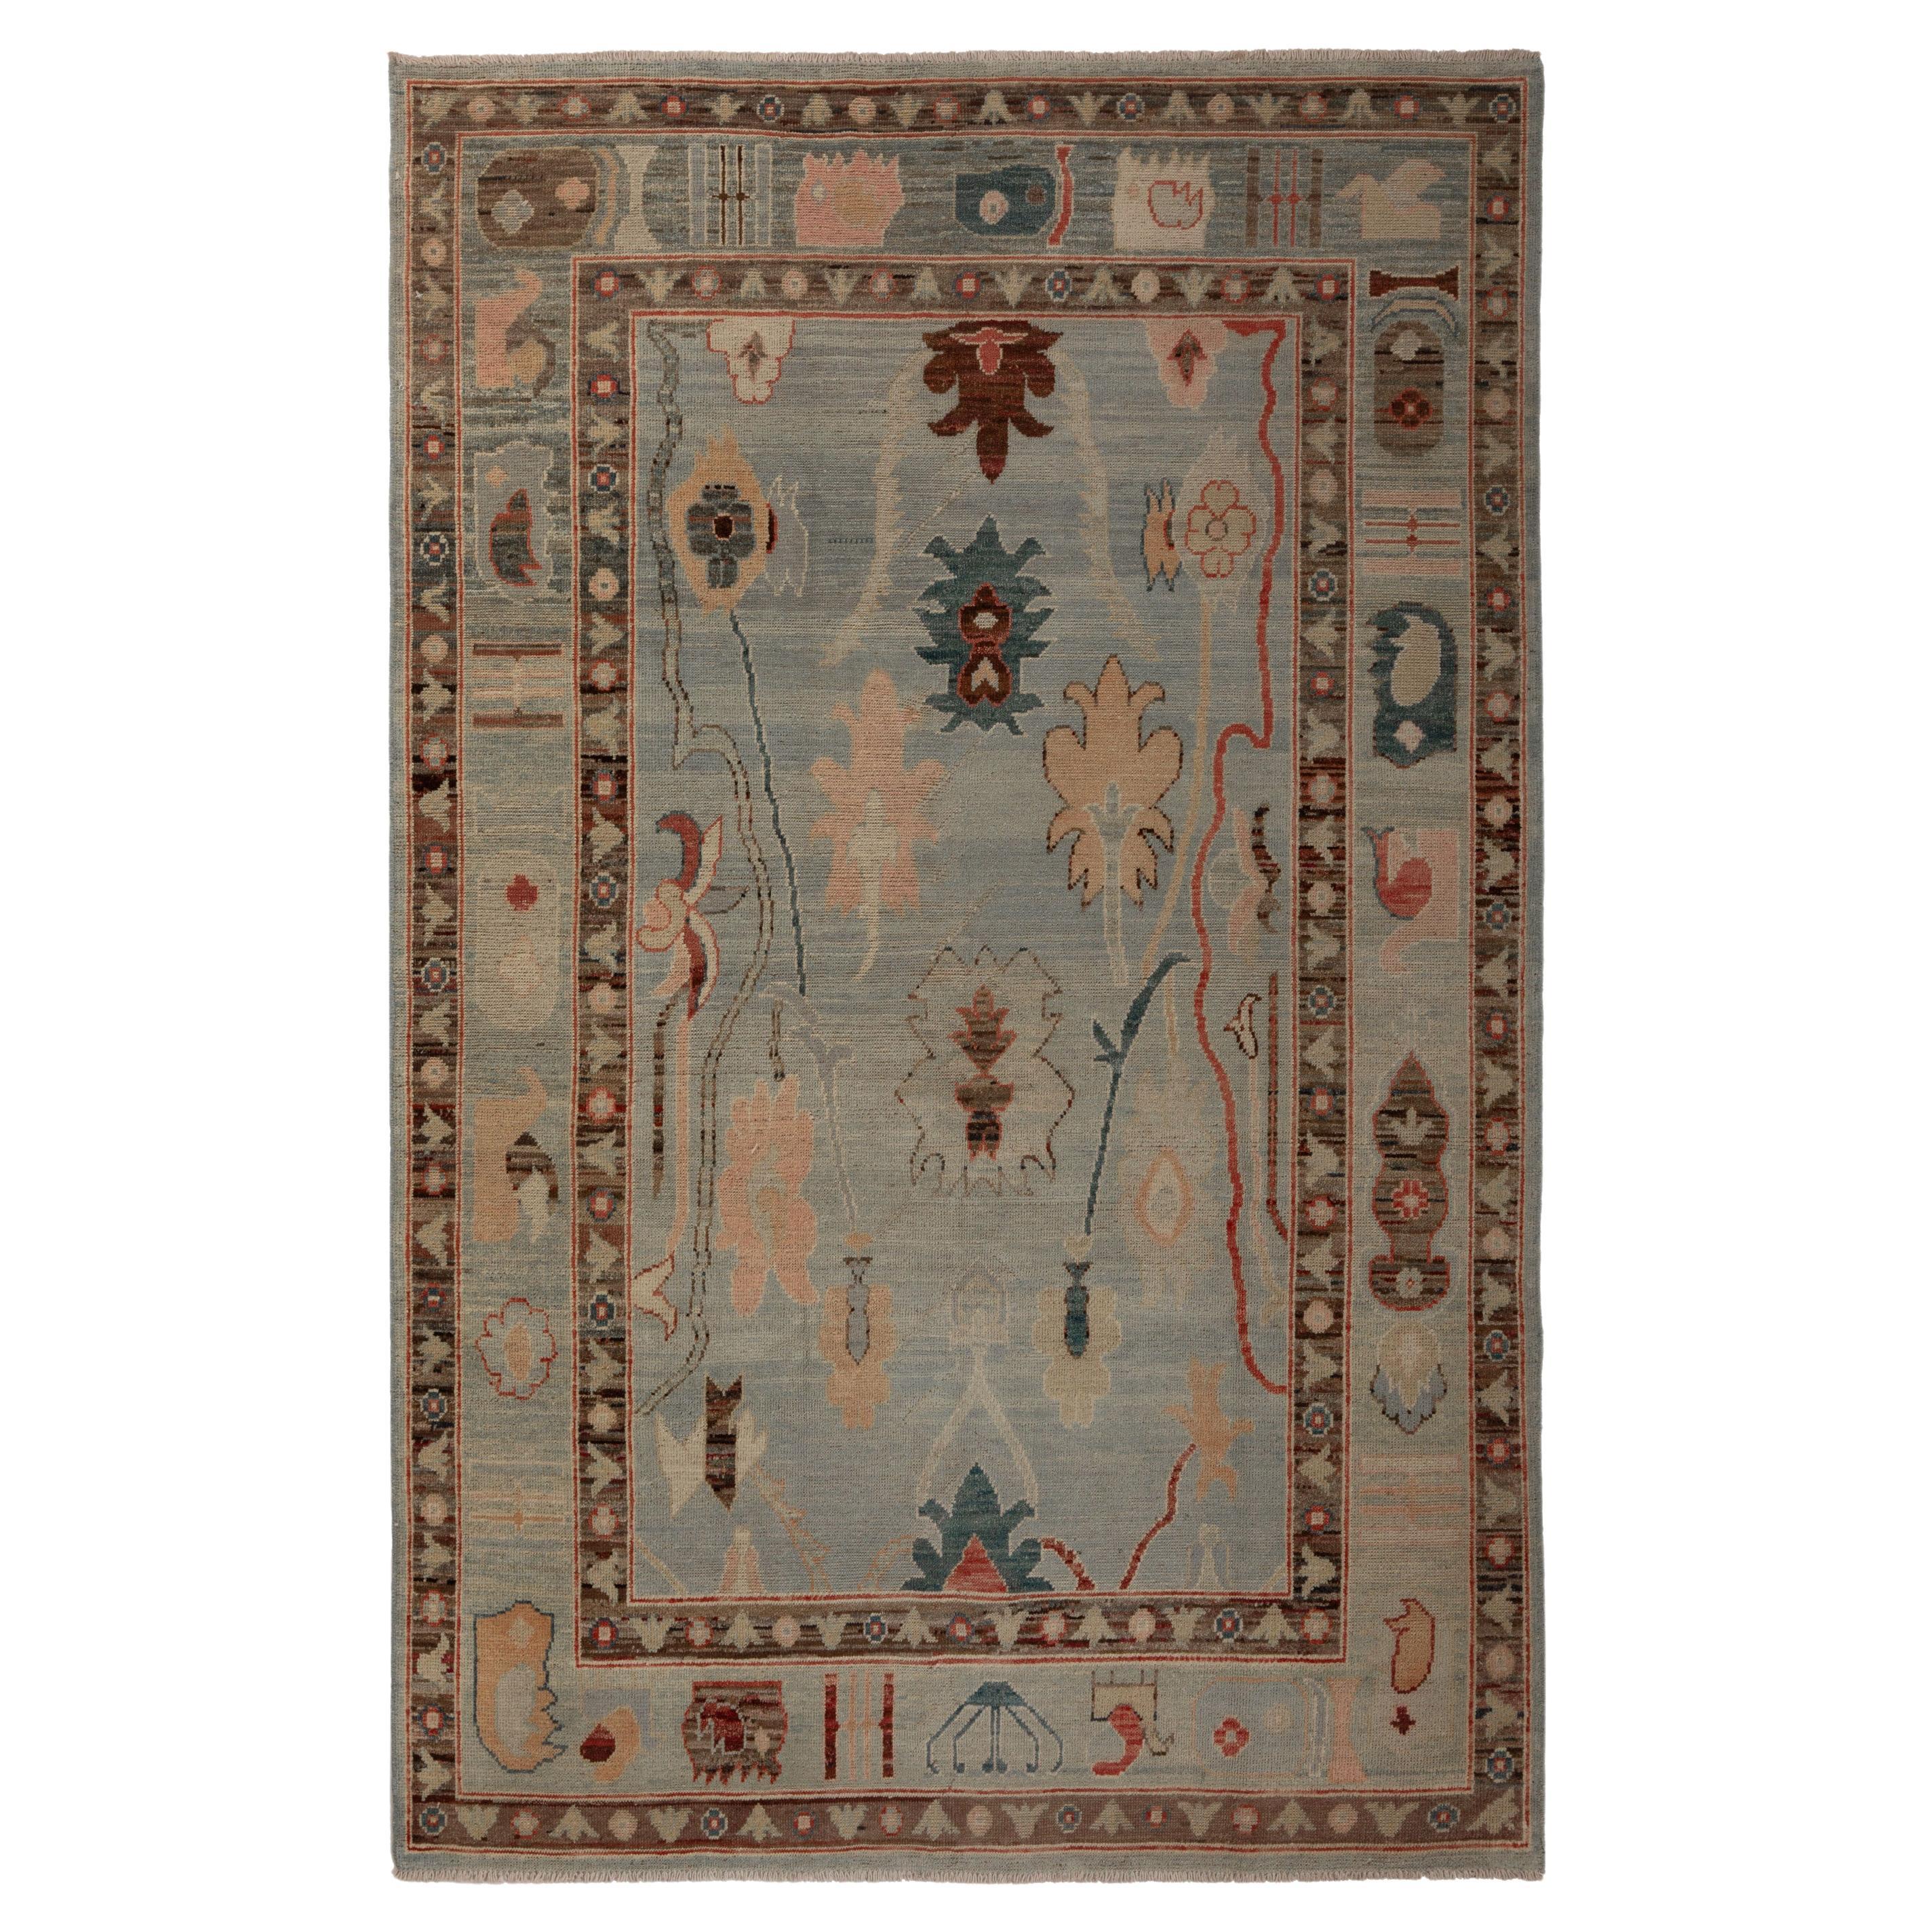 abc carpet Zameen Multicolored Traditional Wool Rug - 5'4" x 7'10"